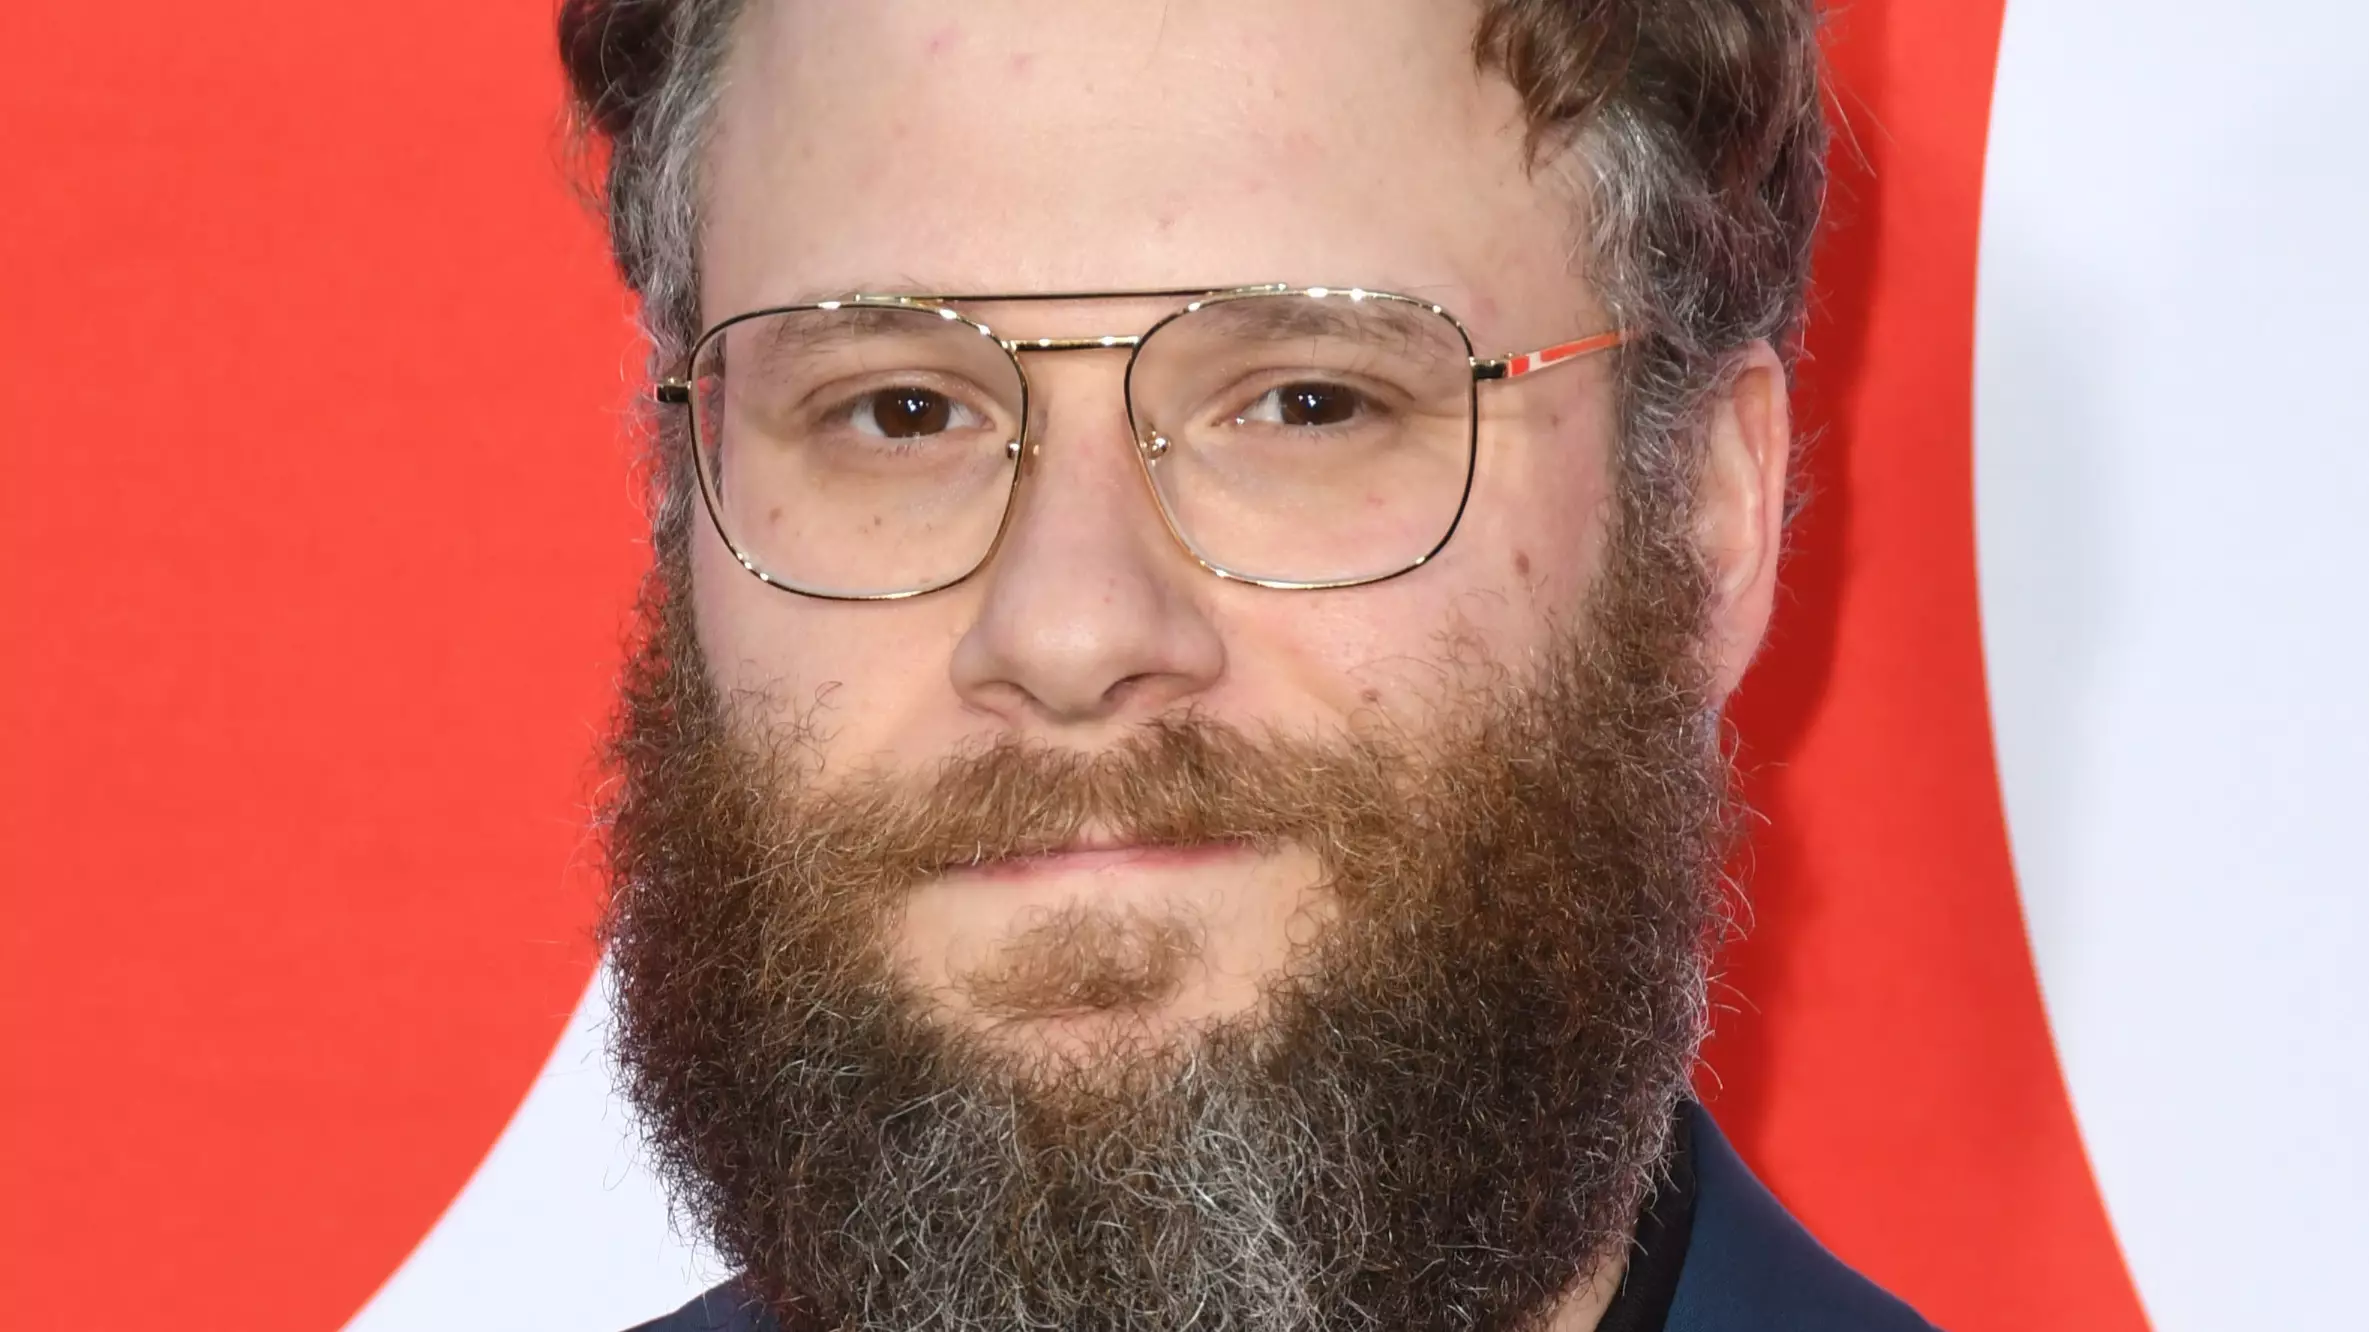 Seth Rogen Says His 'Work Here Is Done' After Underage Man Was Arrested With McLovin ID